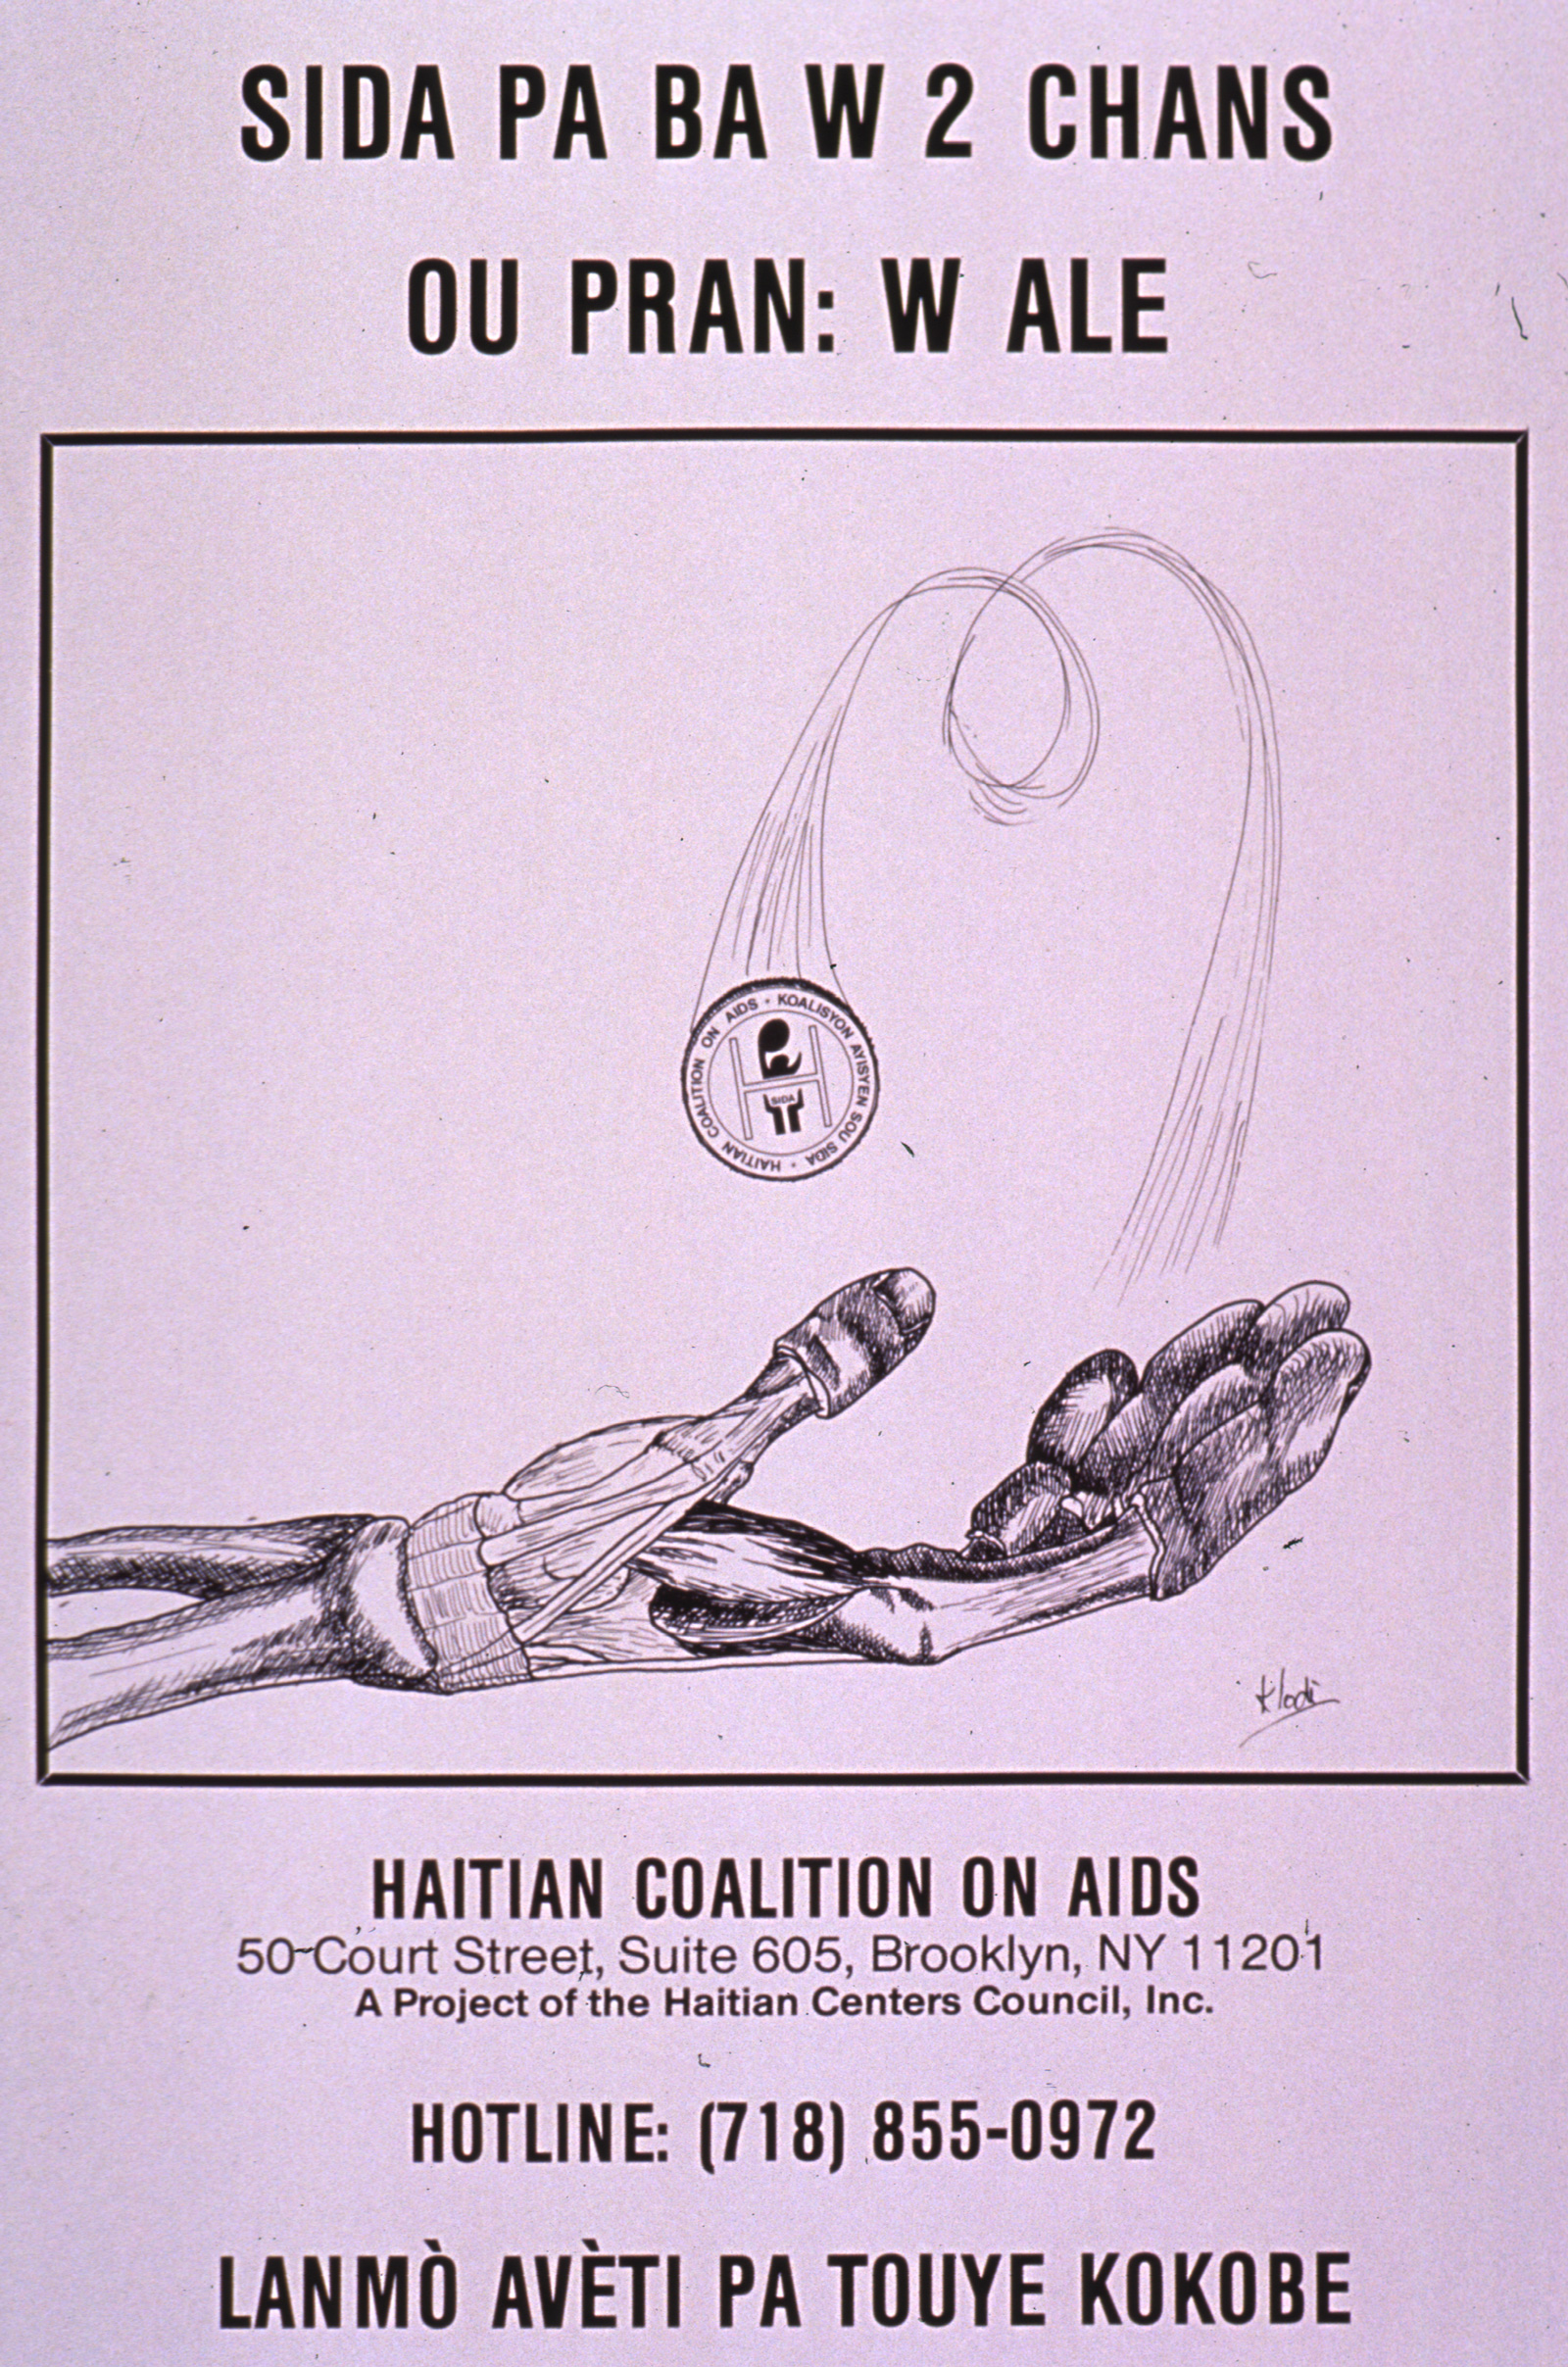 Drawing of a skeletal hand flipping a coin with the title “Sida Pa Ba W 2 Chans Ou Pran: W Ale”